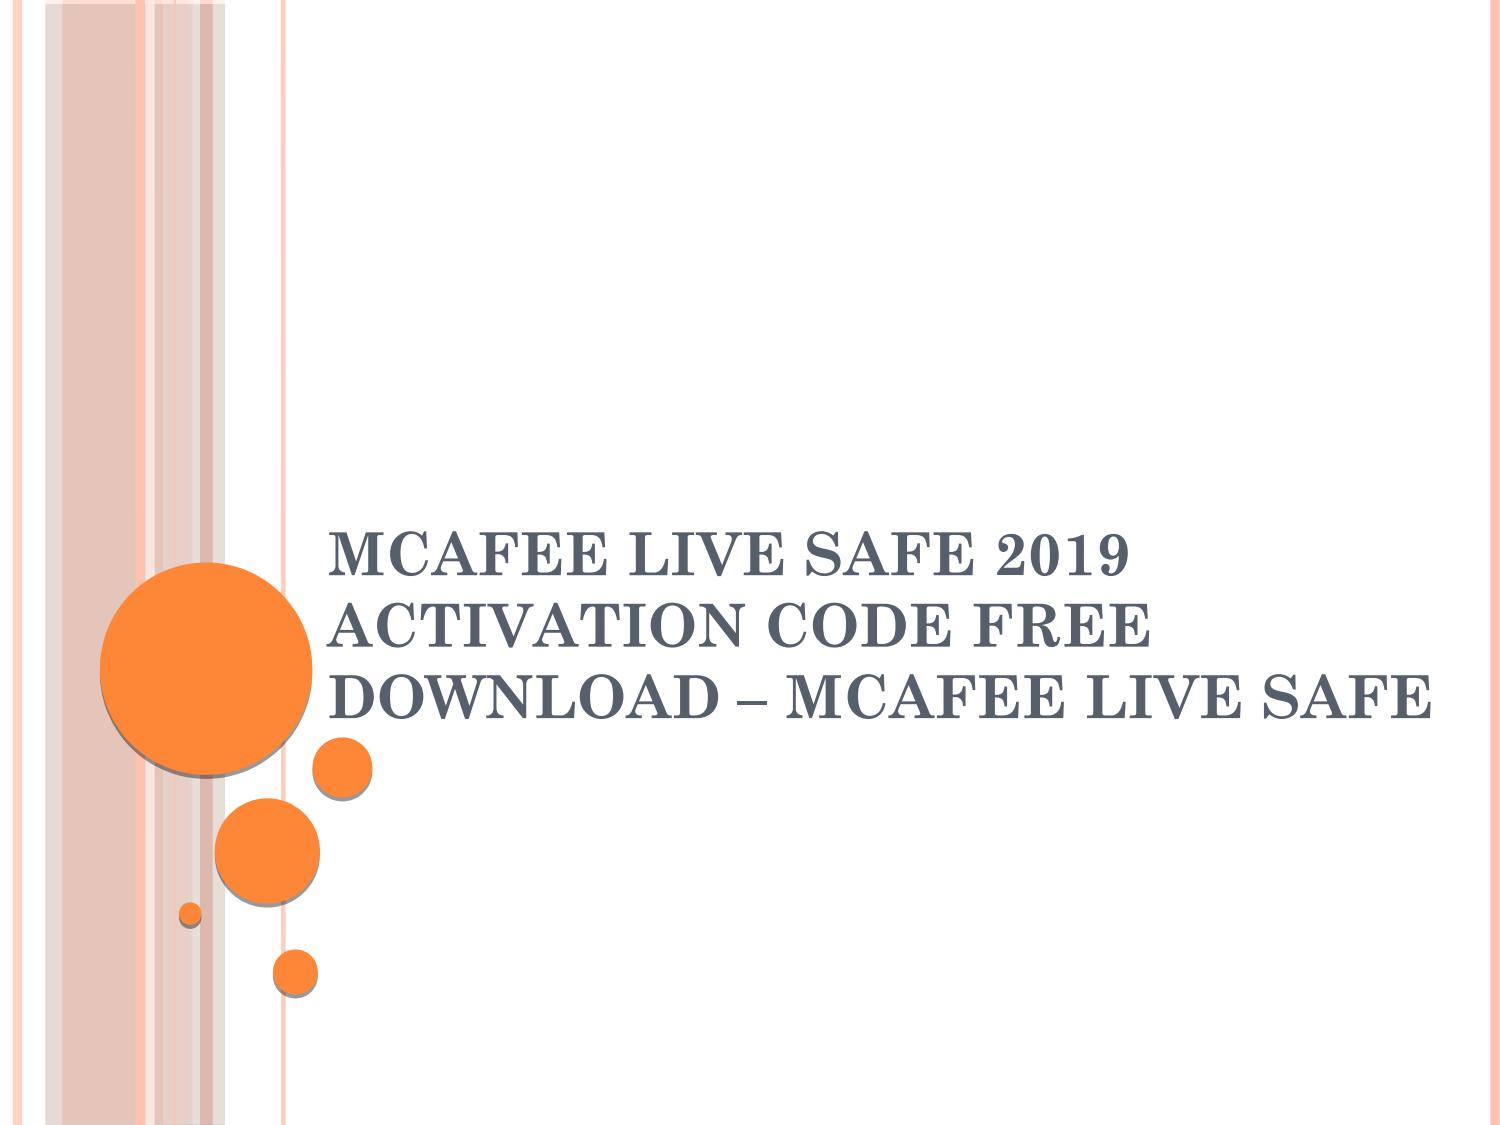 mcafee activation